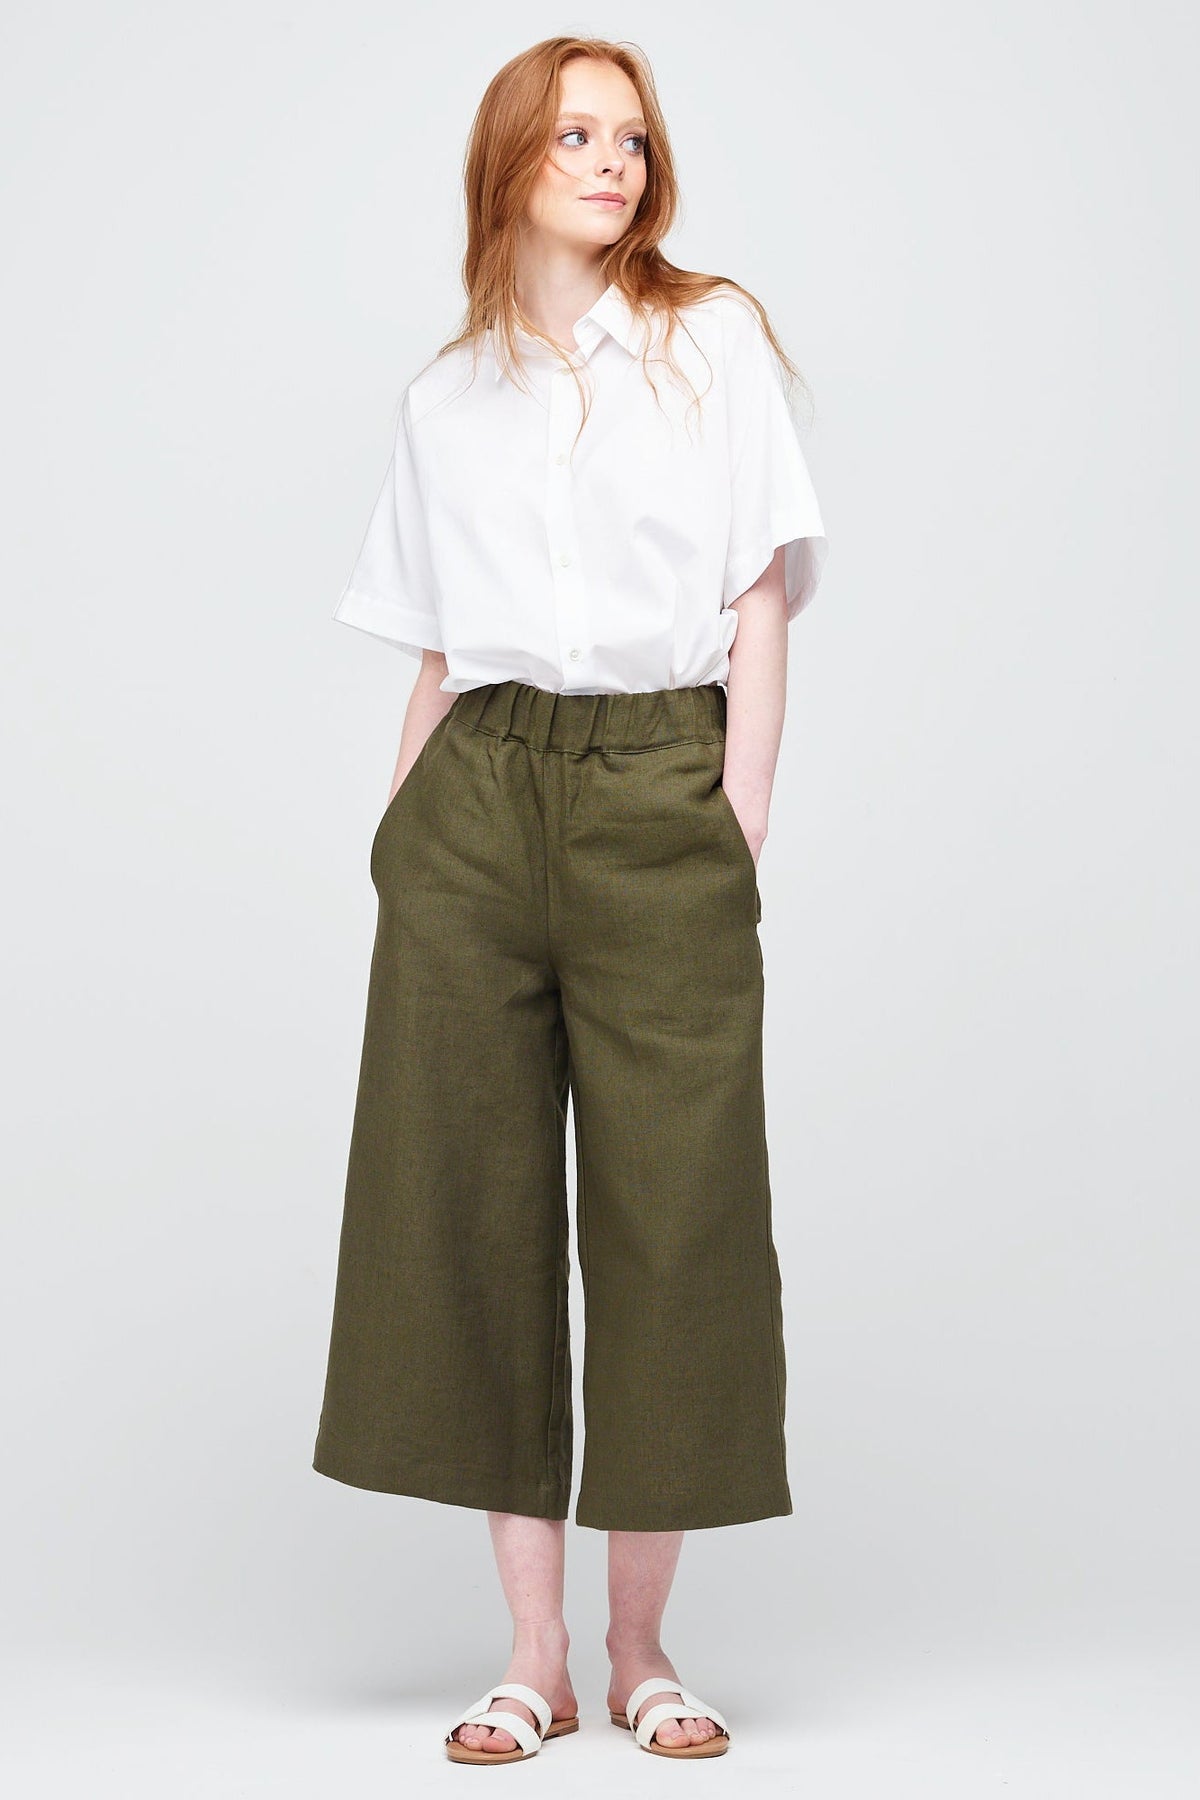 
            A young white women with ginger hair wearing short pj trouser in a khaki coloured linen, styled with an oversized white shirt and sandal.